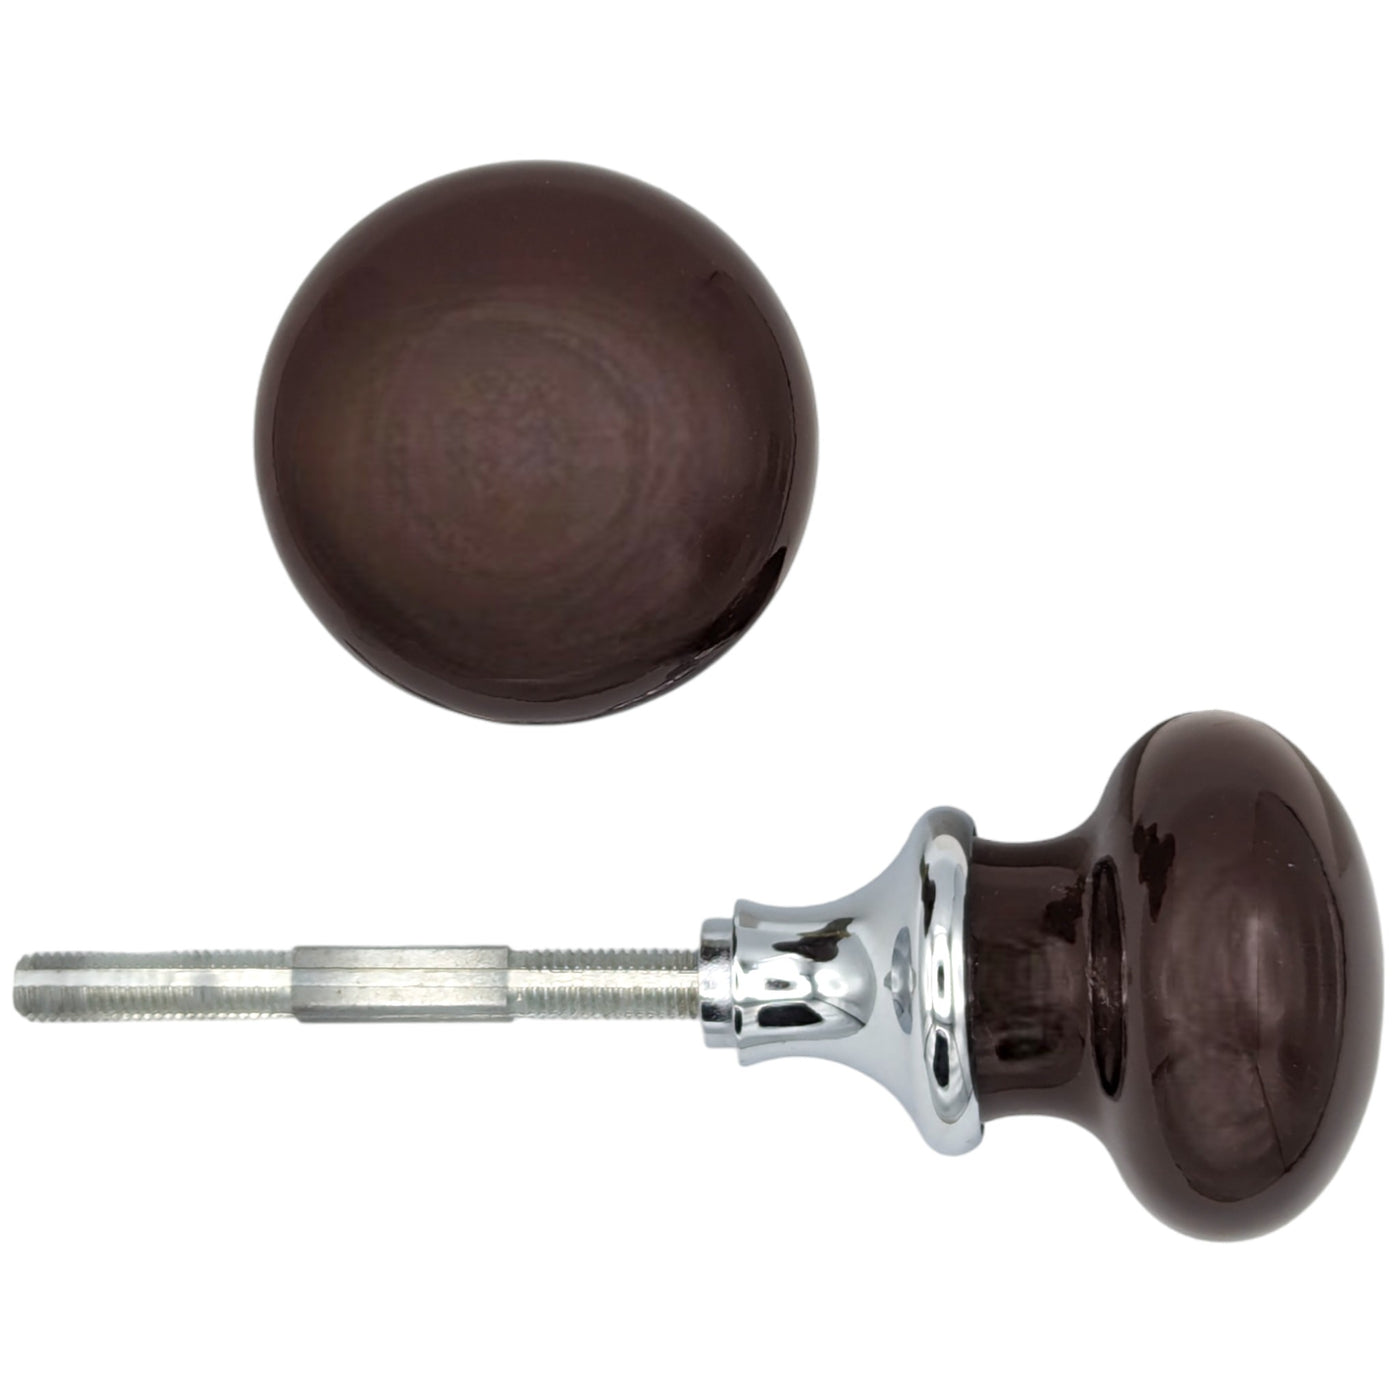 Brown Porcelain Spare Knob Set (Several Finishes Available)